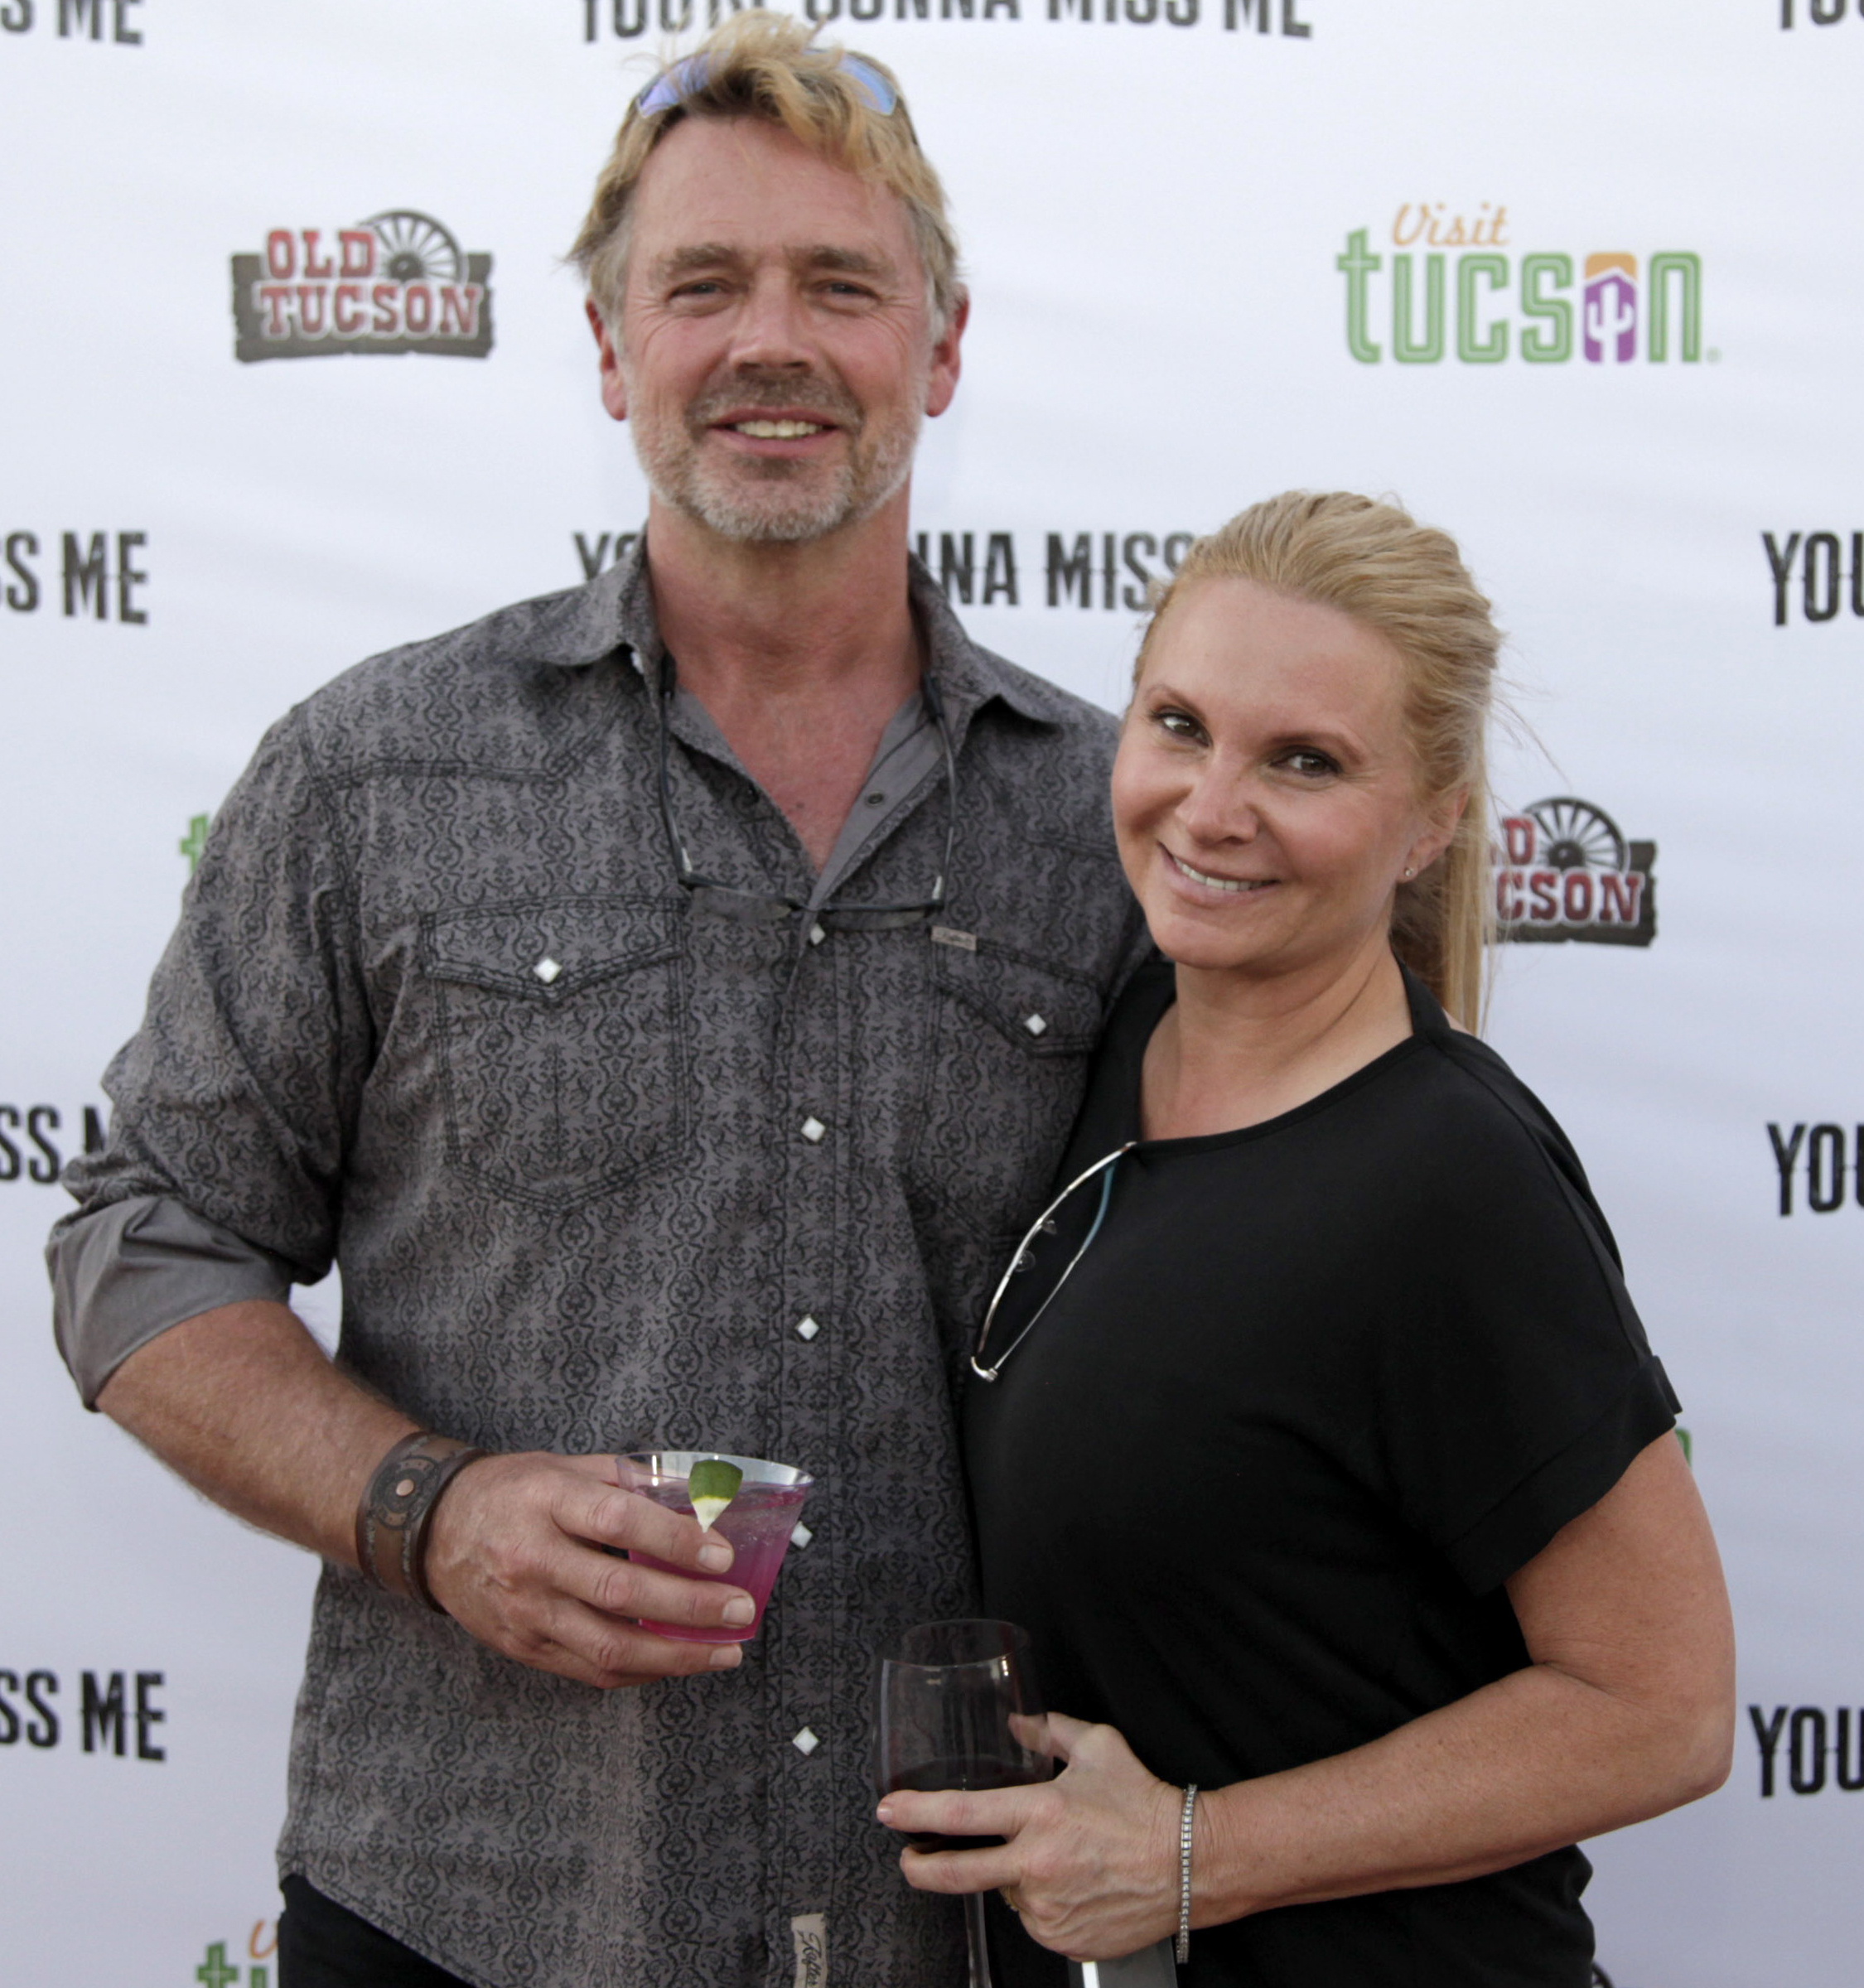 <p><span>"The Dukes of Hazzard" star John Schneider lost wife Alicia Allain at 53 on Feb. 21, 2023. "My beautiful Smile is pain free, living in her new body alongside Jesus," the "Smallville" actor -- who married the actress-producer, who was also his indie filmmaking partner, "before God" in 2019 (they reportedly made their union legal later that year after </span><a href="https://www.wonderwall.com/news/dukes-hazzard-star-john-schneiders-divorce-finally-over-after-5-years-money-details-3020800.article">his long divorce from his second wife was finalized</a><span>) -- wrote on Facebook alongside <a href="https://www.facebook.com/johnschneiderstudios/posts/pfbid0n9JswoPRGtQ5UnZExEwaEBn8gCdX9peKygYZy6z96u7JDHVs4kFqMAsTmLm4FXgVl">photos</a> of Alicia, who had battled breast cancer in recent years, and their wedding rings. "Please respect our privacy during this time of grief. Please do not ask any questions." He also asked his followers to share "any pictures of us and our obvious love and adoration for each other" in the comments section of his post. "Lastly," he added, "hug those you love tight and let them know how you feel. We always did."</span></p><p>In the days that followed, John continued to post amid his grief, captioning photos of himself kissing his late wife, "I simply have no words but… I miss you desperately Mrs. Schneider" and "For me, this is what love looks like." He also shared another pic of himself holding Alicia, writing, "This is a time of unimaginable sorrow for me. Grief is much too small a word. I've heard it said that 'with great love comes great sorrow.' I had no idea what that meant until now."</p>